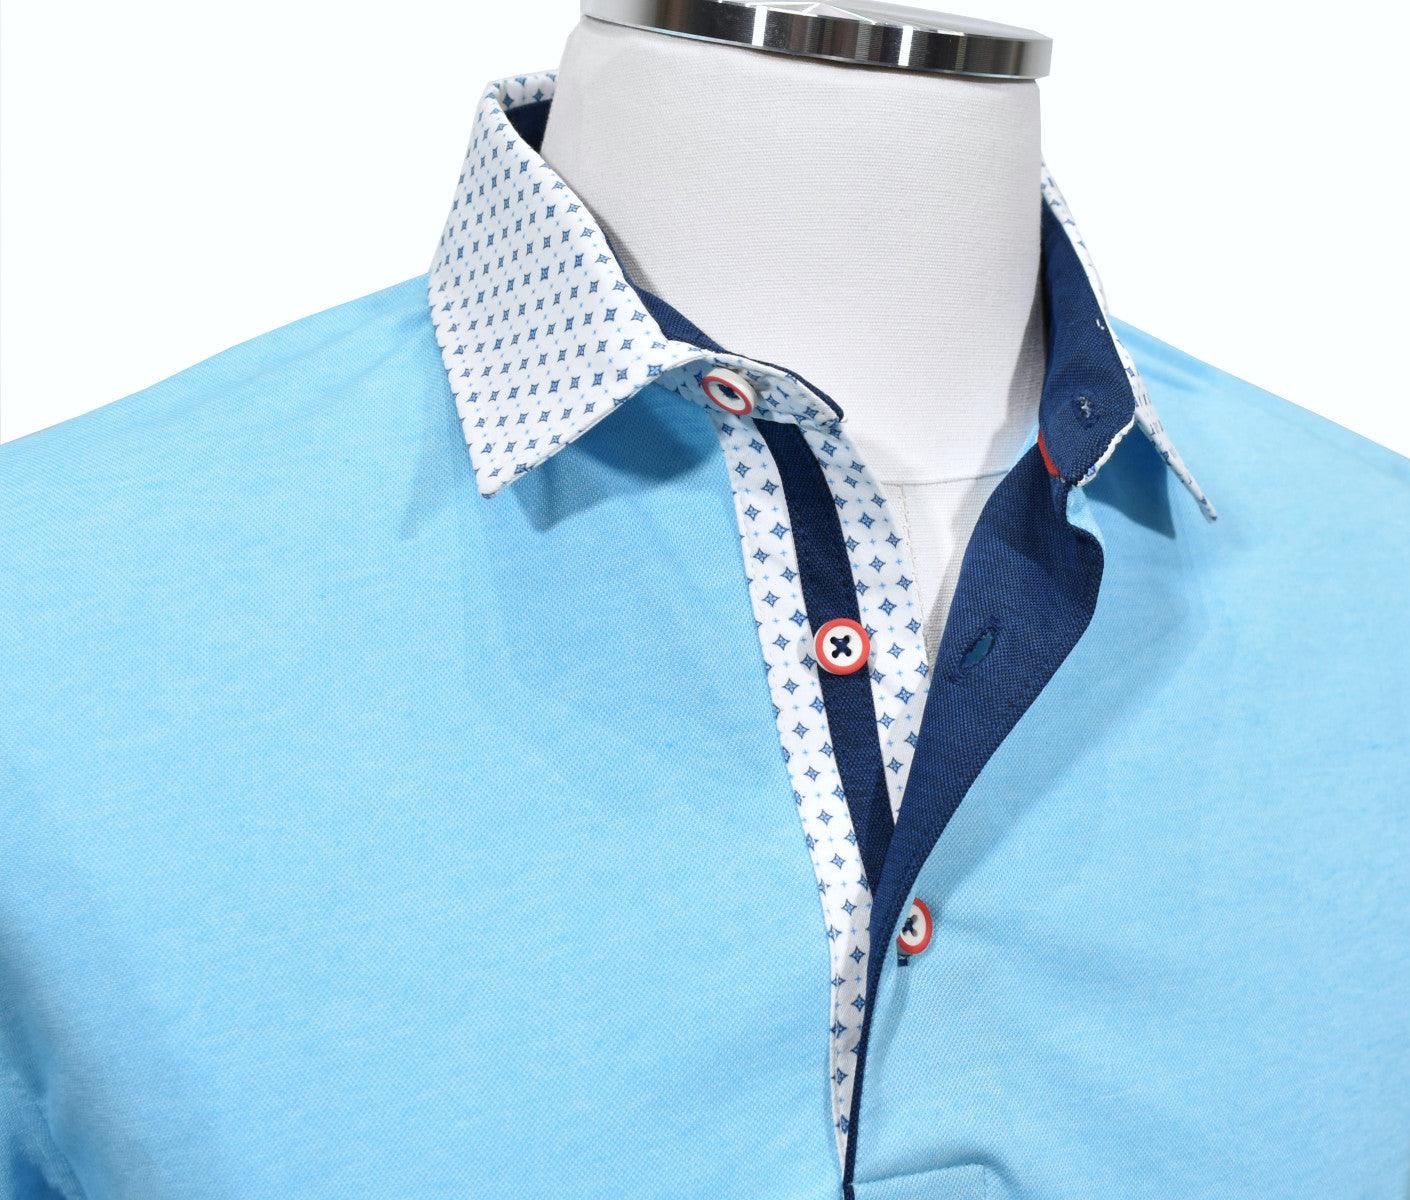 Our newest polo will add a fresh look to your Spring/Summer wardrobe.  As we all get back to normal, these polos will define a new spirit, update your style and image.  Premium cotton fabric with lycra for comfort and complimentary printed collar fabric, custom buttons and piping make these polos a must have.  Modern fit.    Marcello Signature Collar Sport Polo - Teal